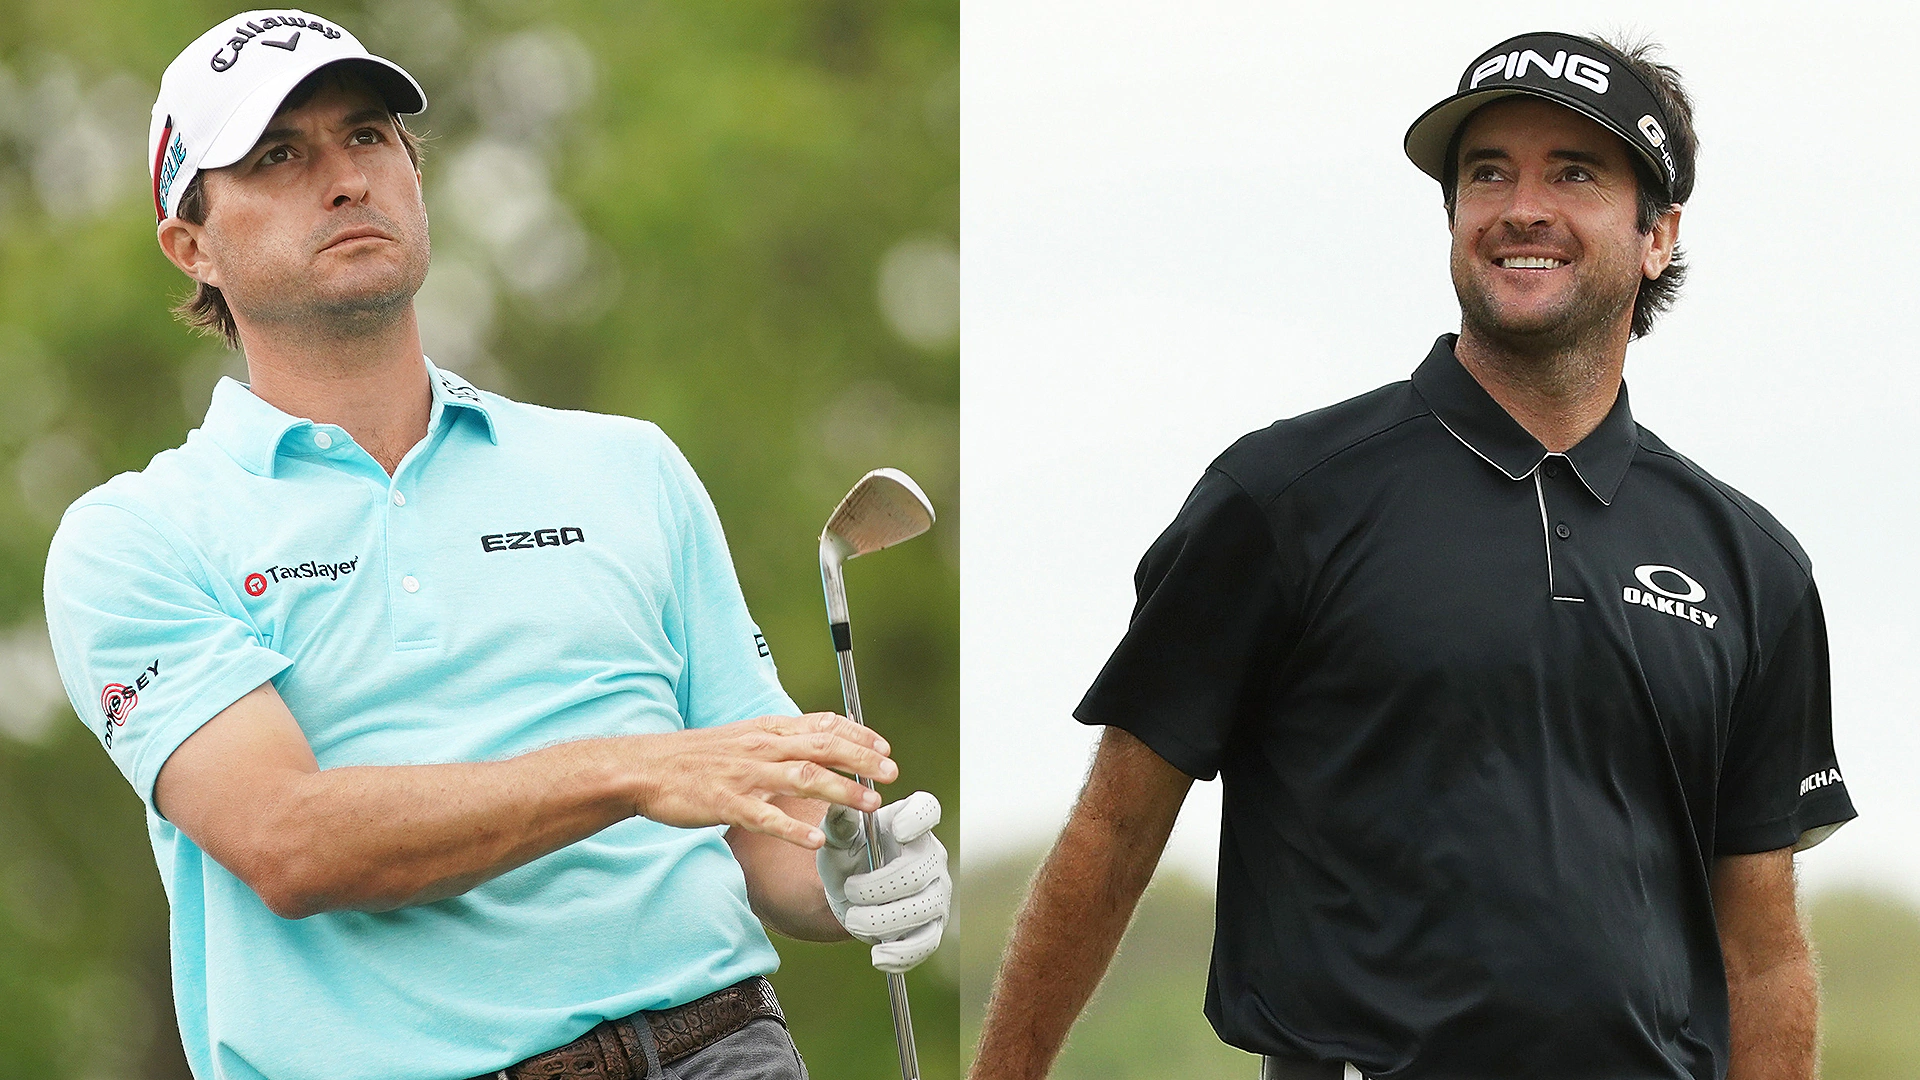 Road to the final: How Watson, Kisner got there